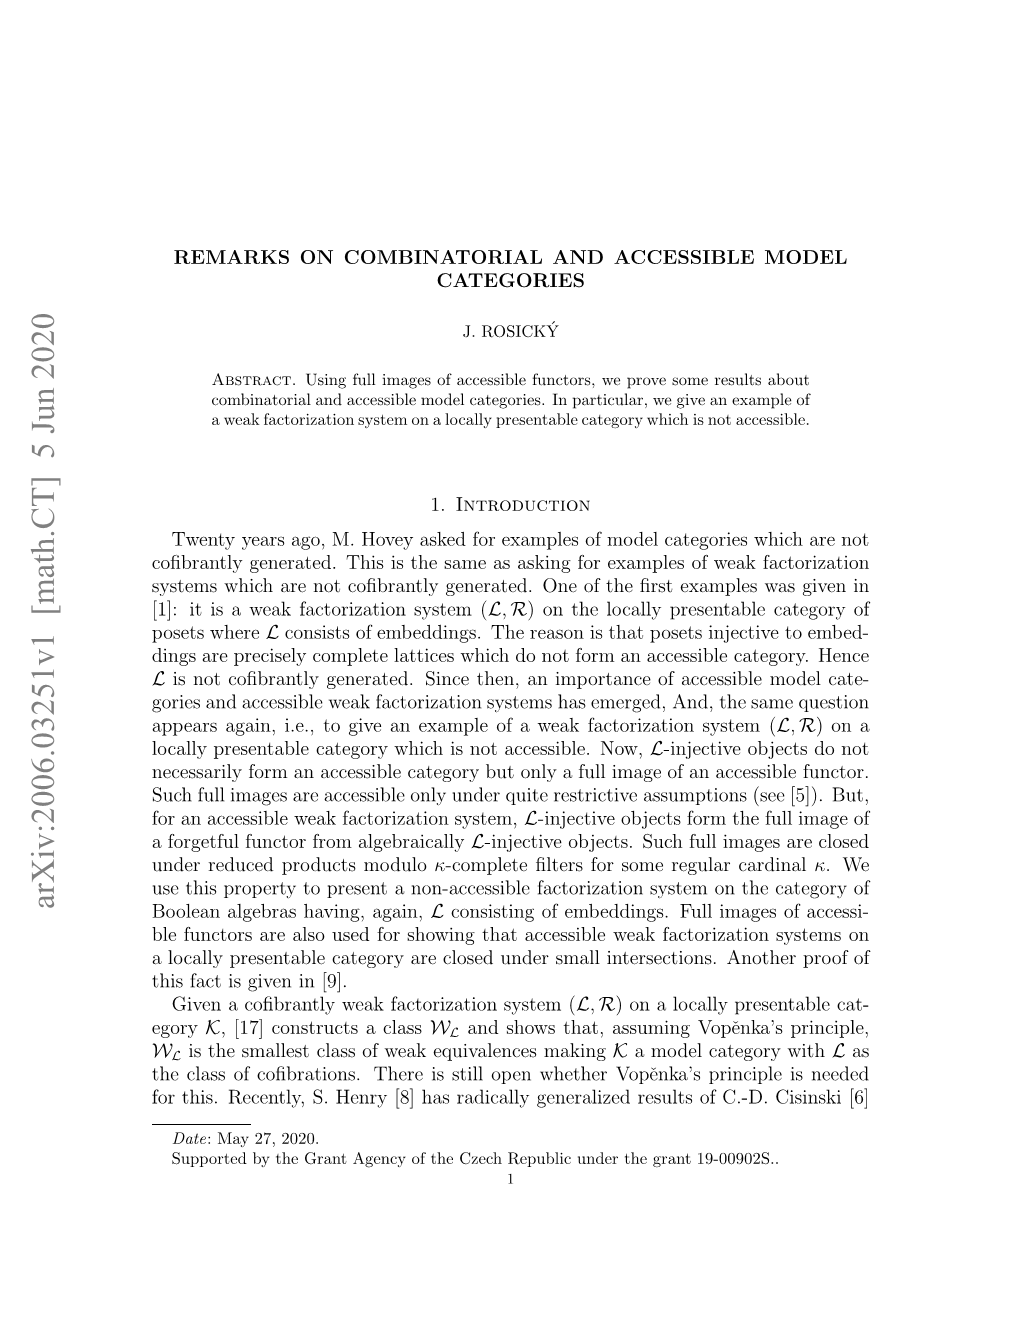 Remarks on Combinatorial and Accessible Model Categories 3